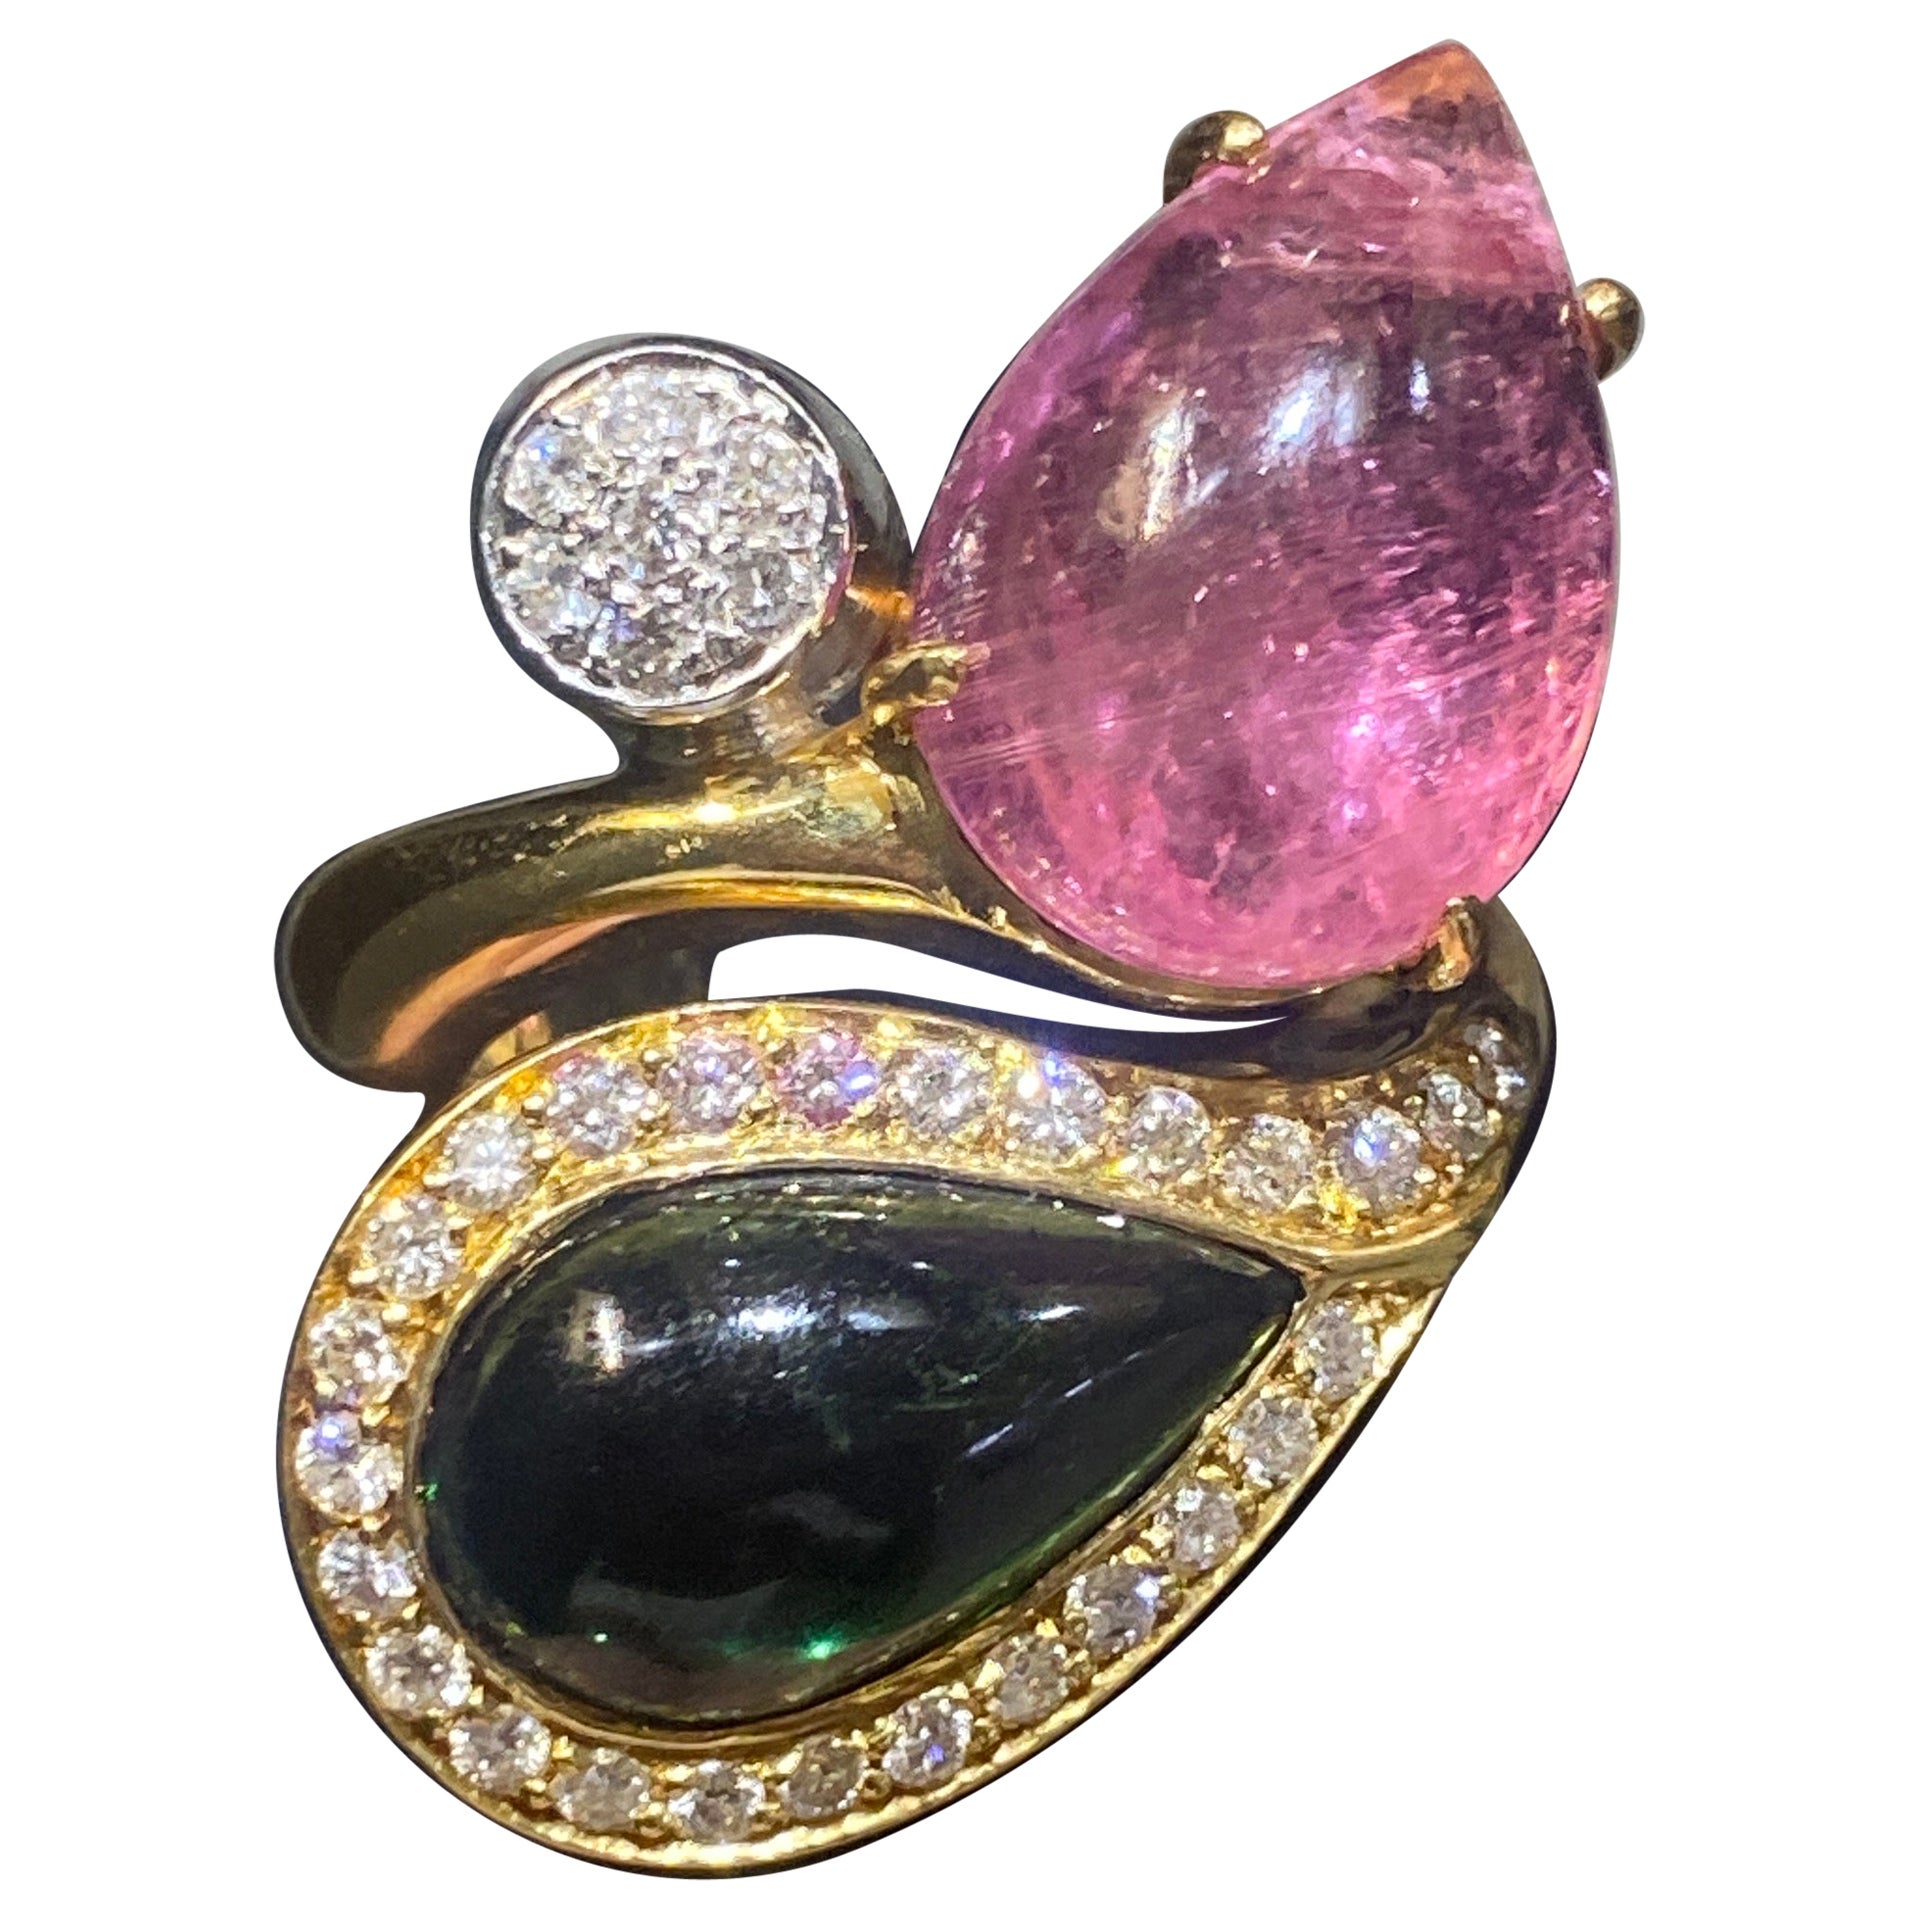 Bulgari 1980s 18 carat gold, diamond and green and pink tourmaline cocktail ring For Sale